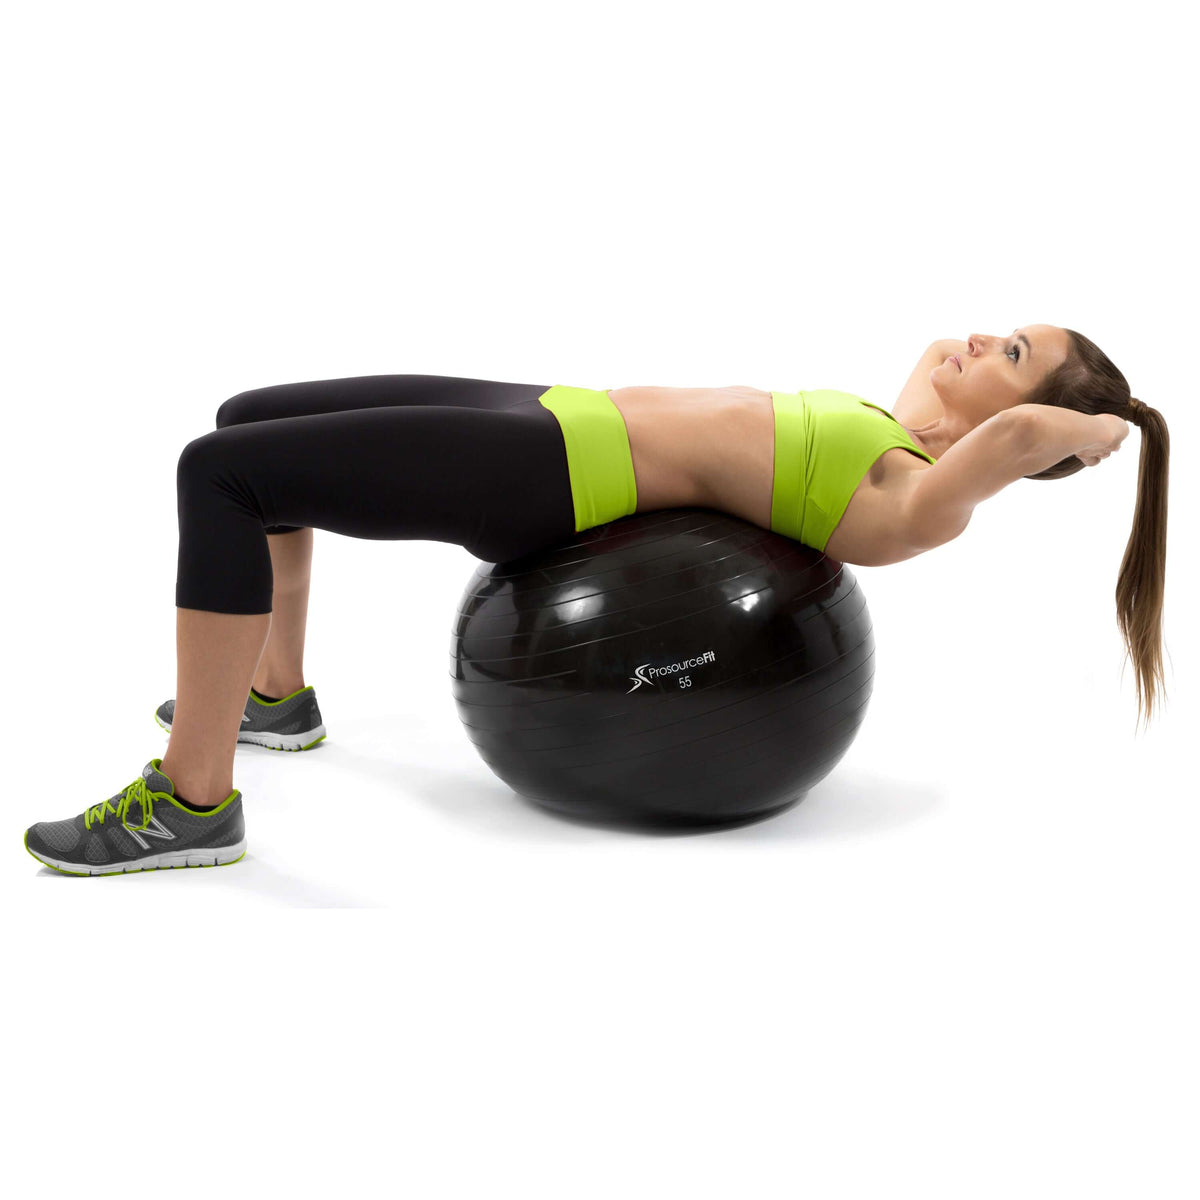 Stability Exercise Ball by Jupiter Gear